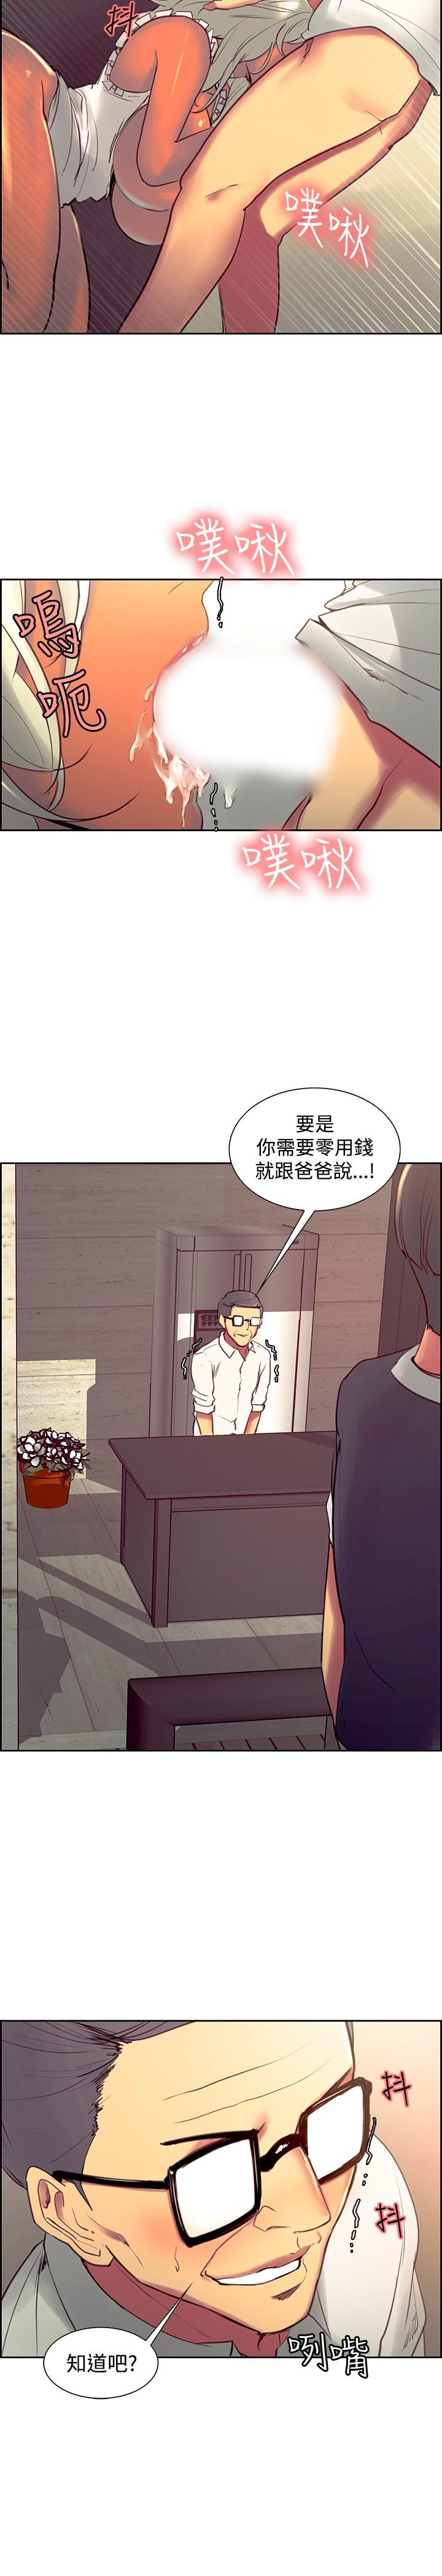 [Serious] Domesticate the Housekeeper 调教家政妇 Ch.29~44END [Chinese]中文 65